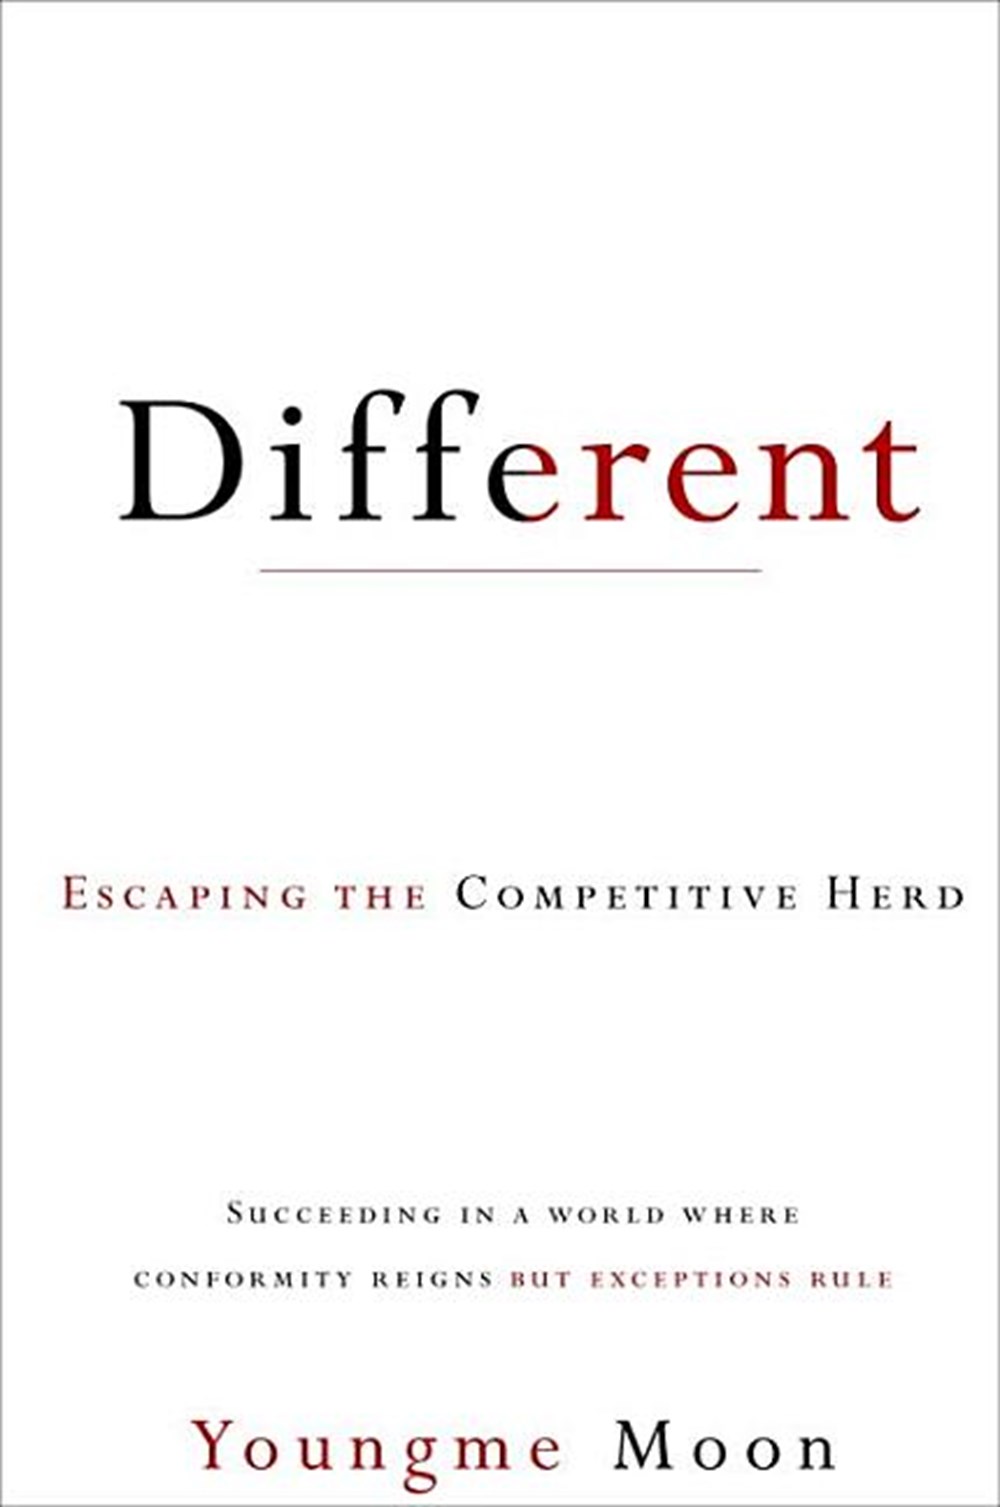 Different Escaping the Competitive Herd